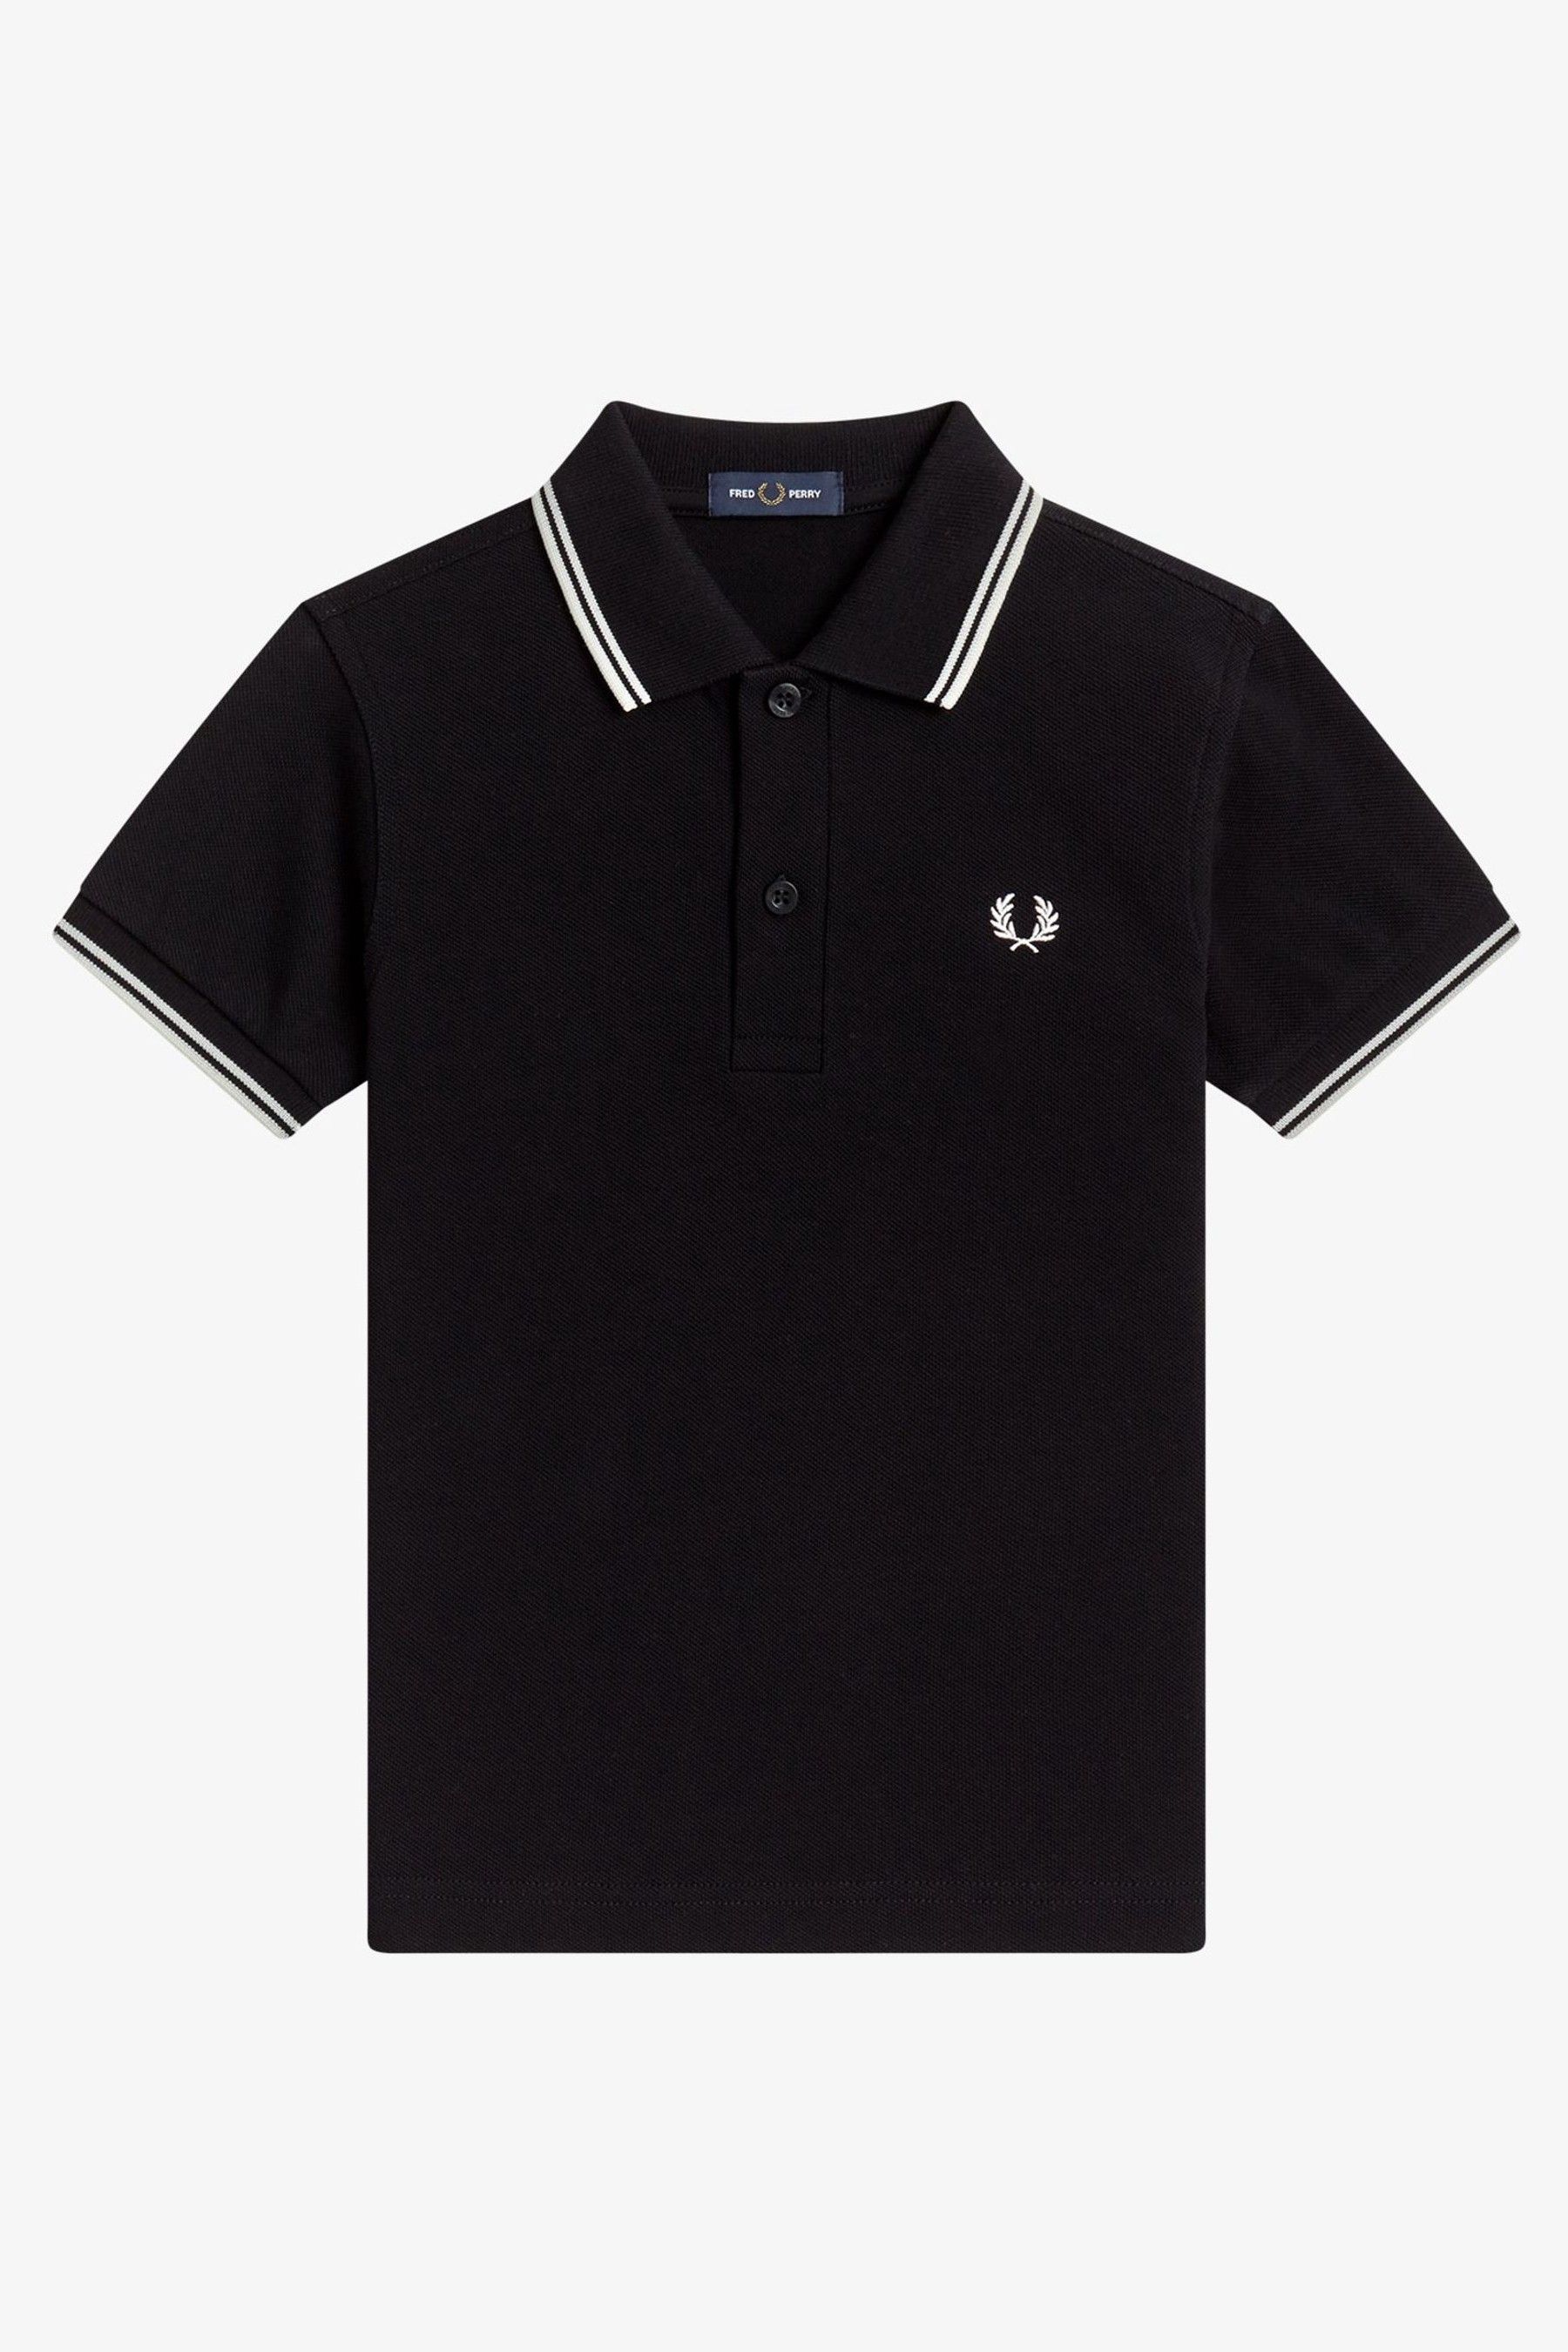 Buy Fred Perry Kids Twin Tipped Polo Shirt from the Next UK online shop